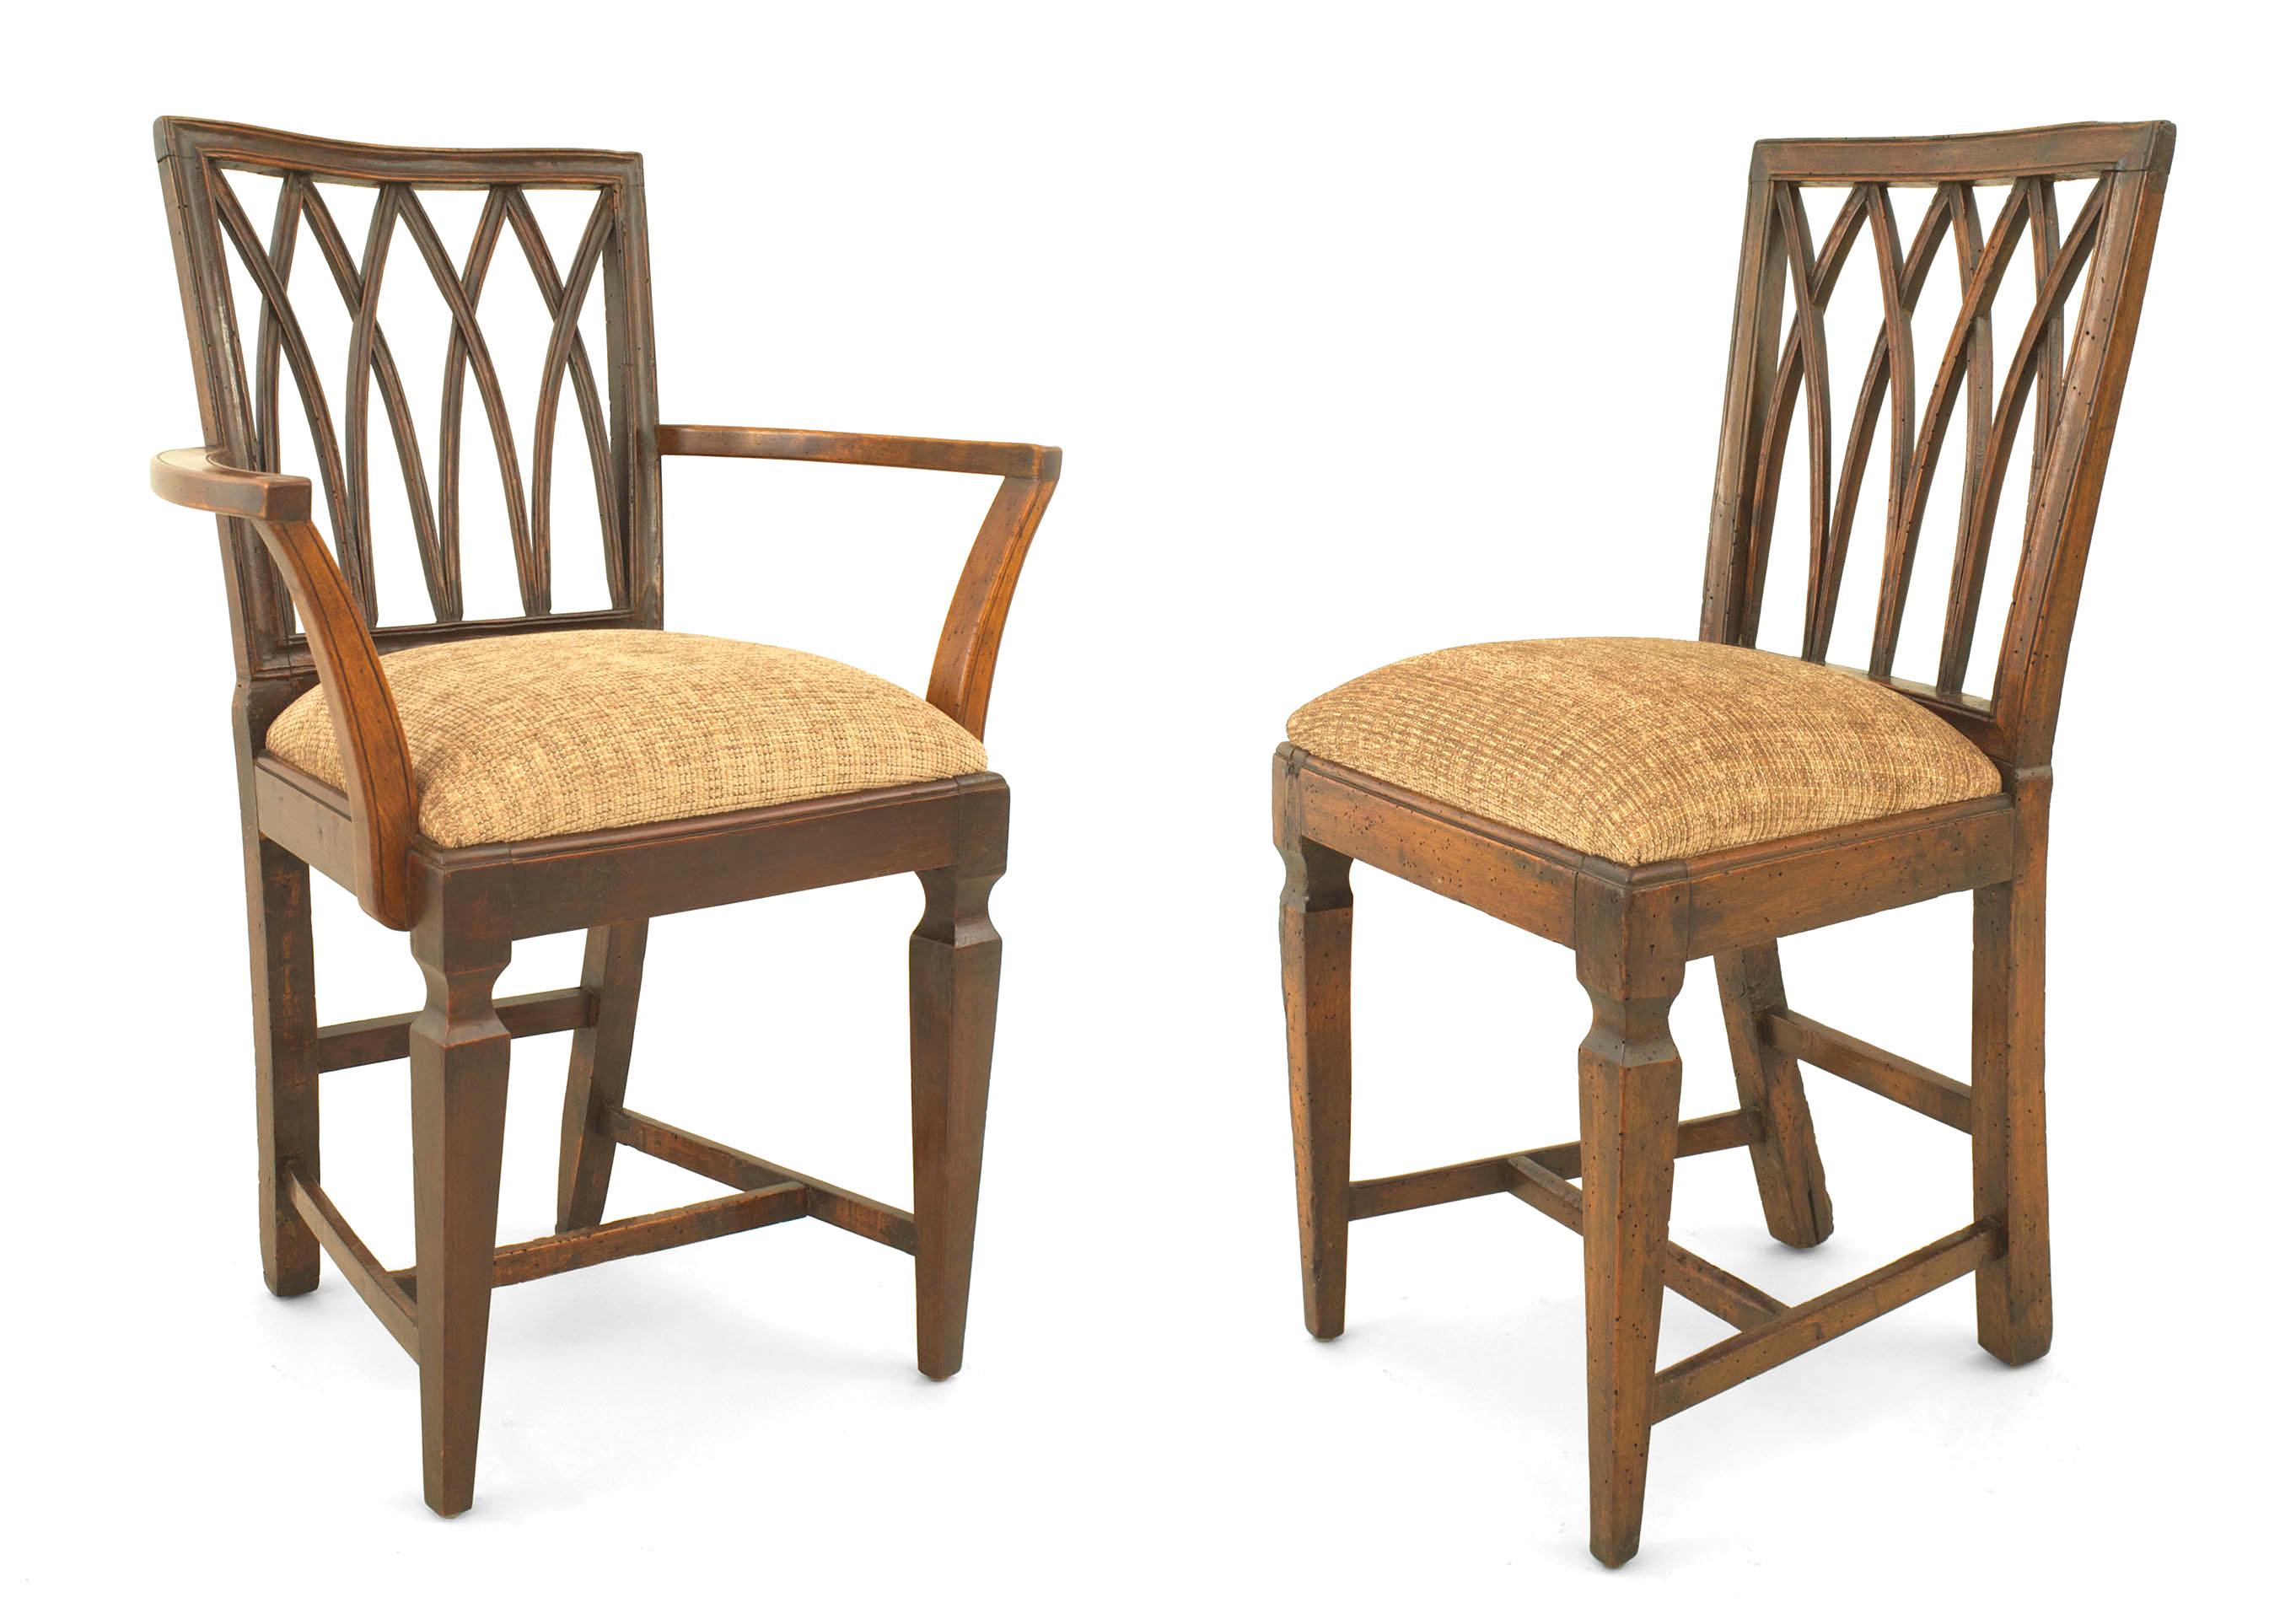 Set of 12 English Country (18/19th Cent) walnut chairs with an open 